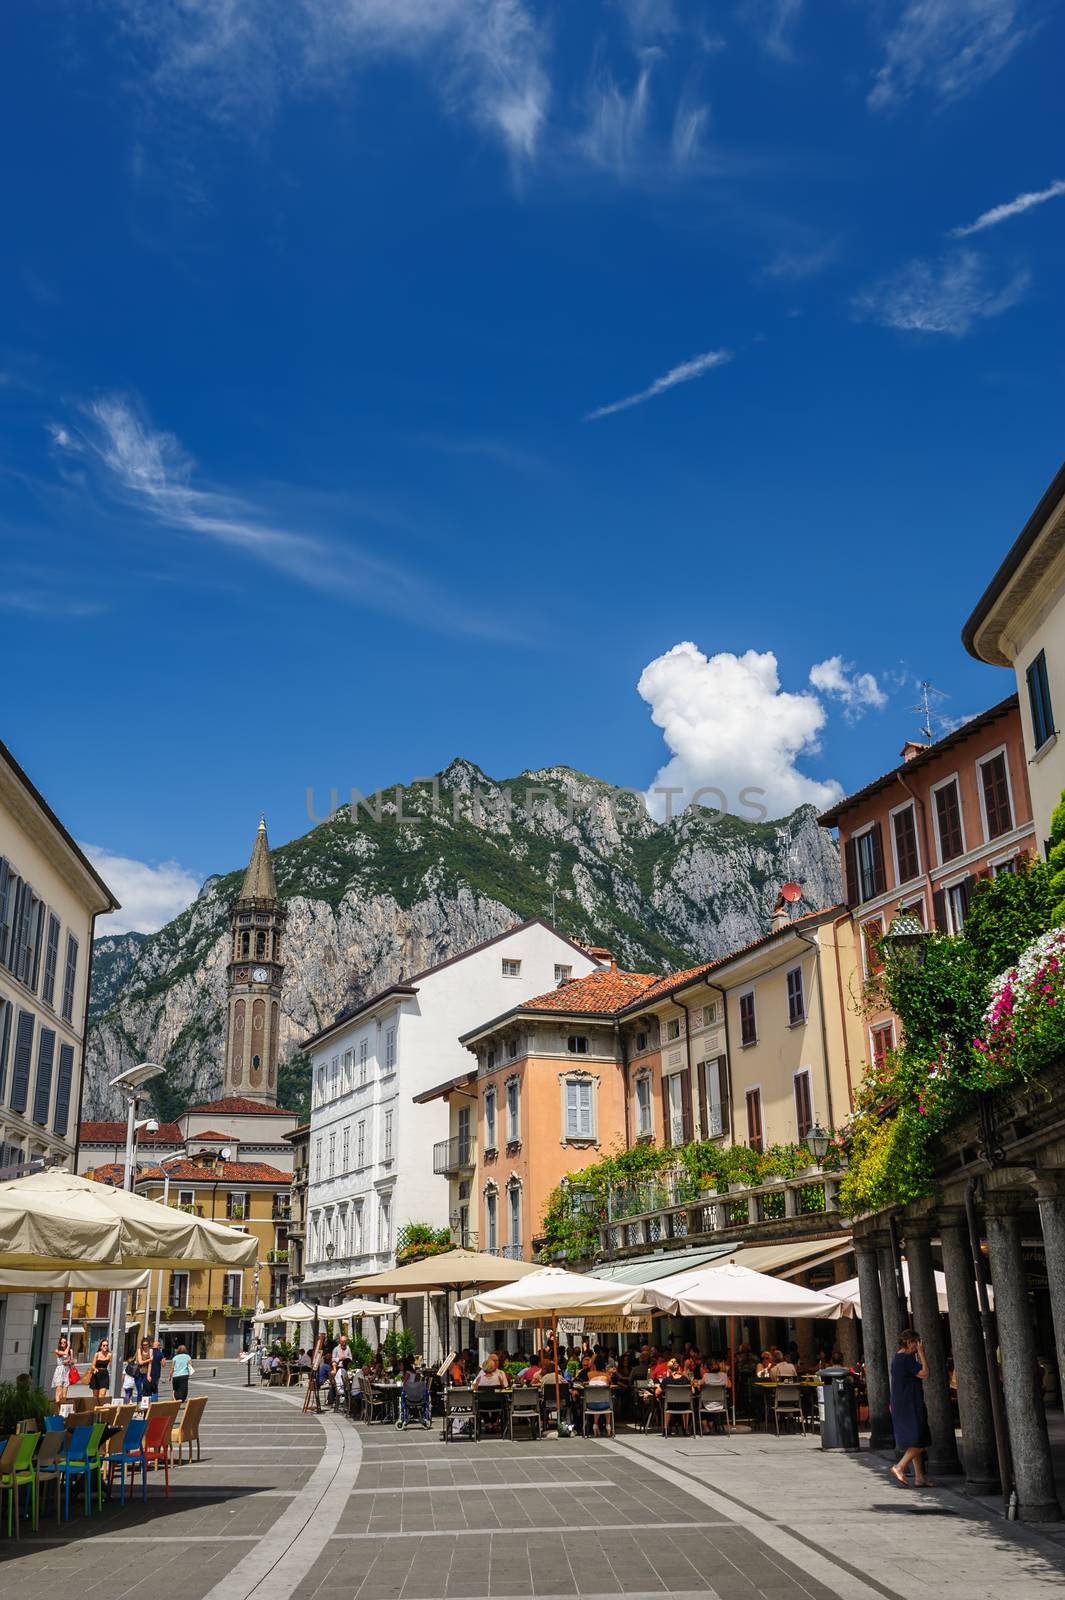 Central streets of Lecco town, with people in outdoor cafe and bell tower. by starush